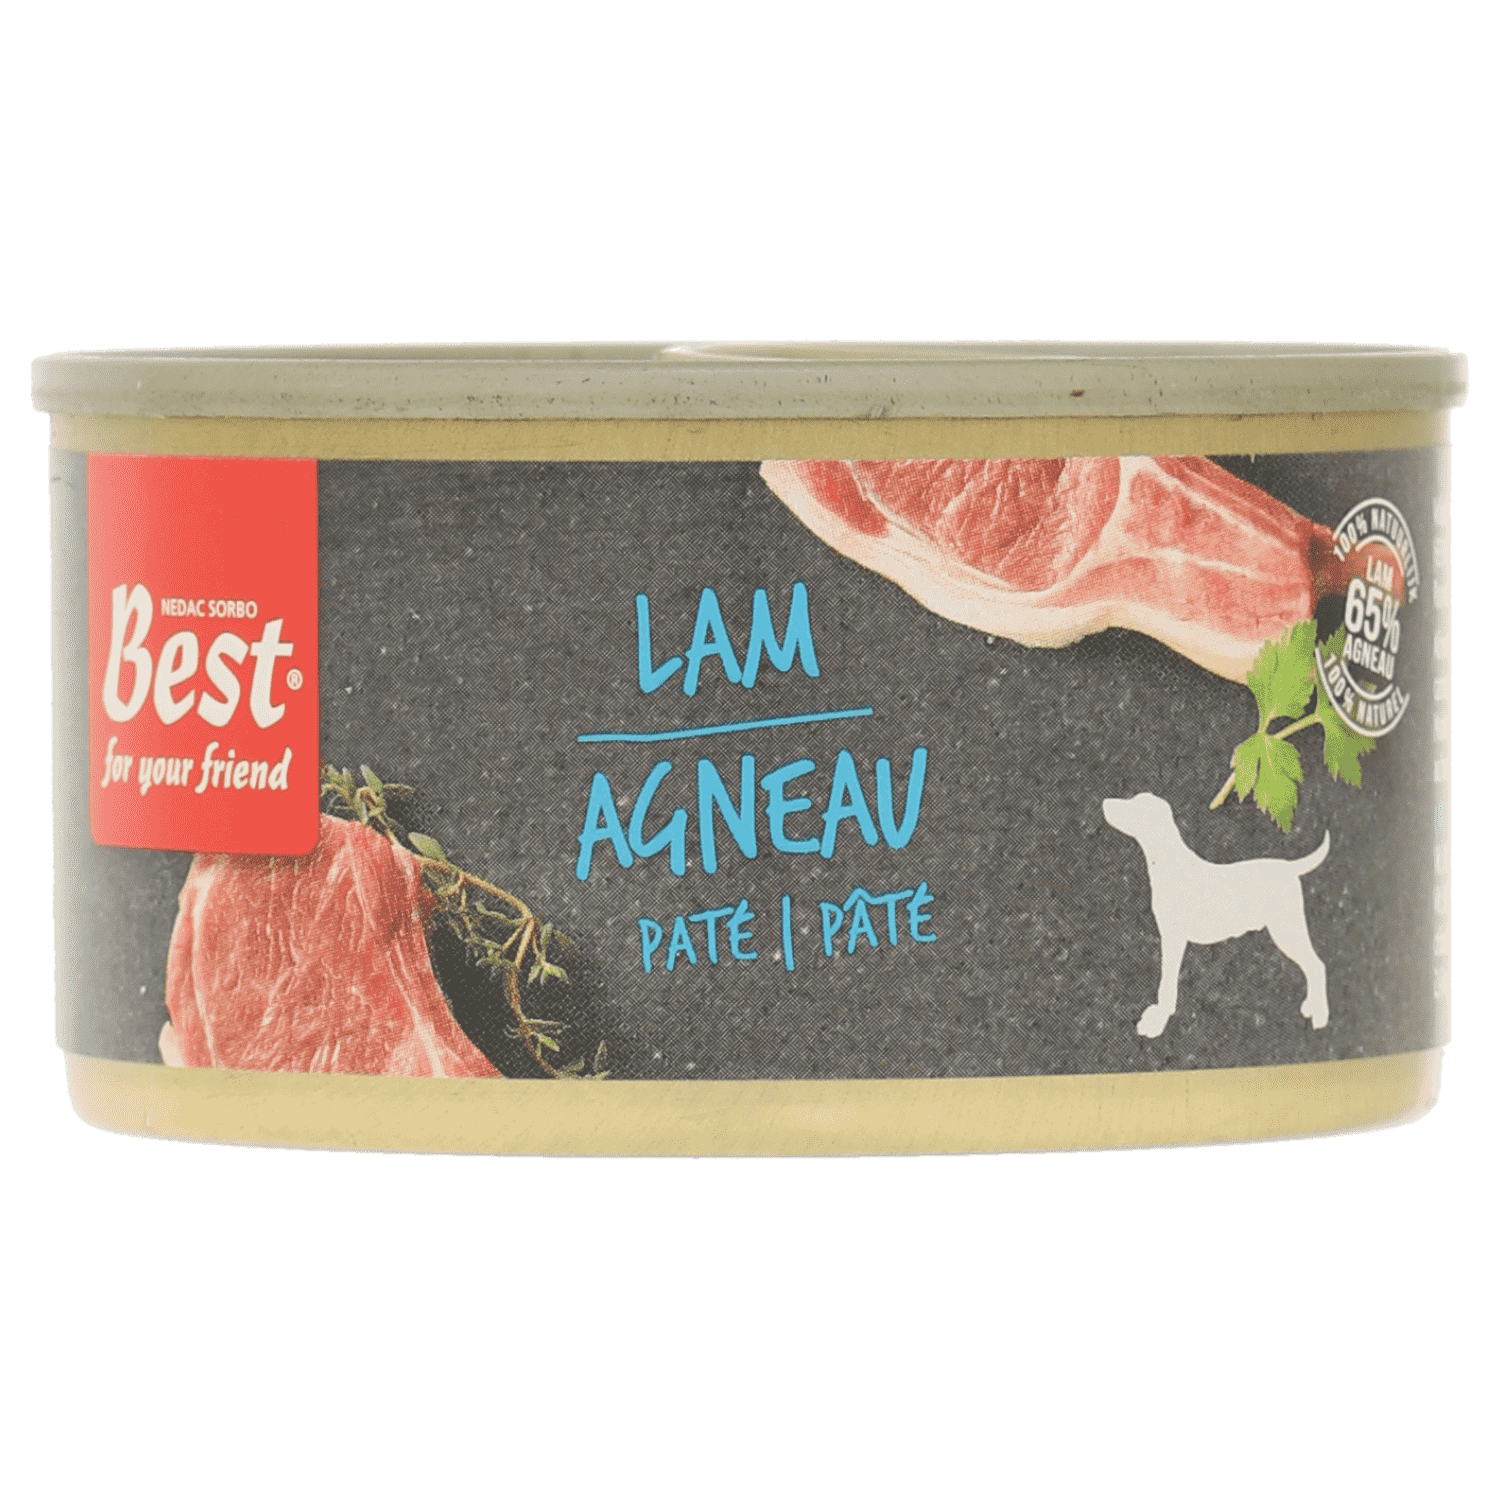 Steamed lamb meal, 95 g